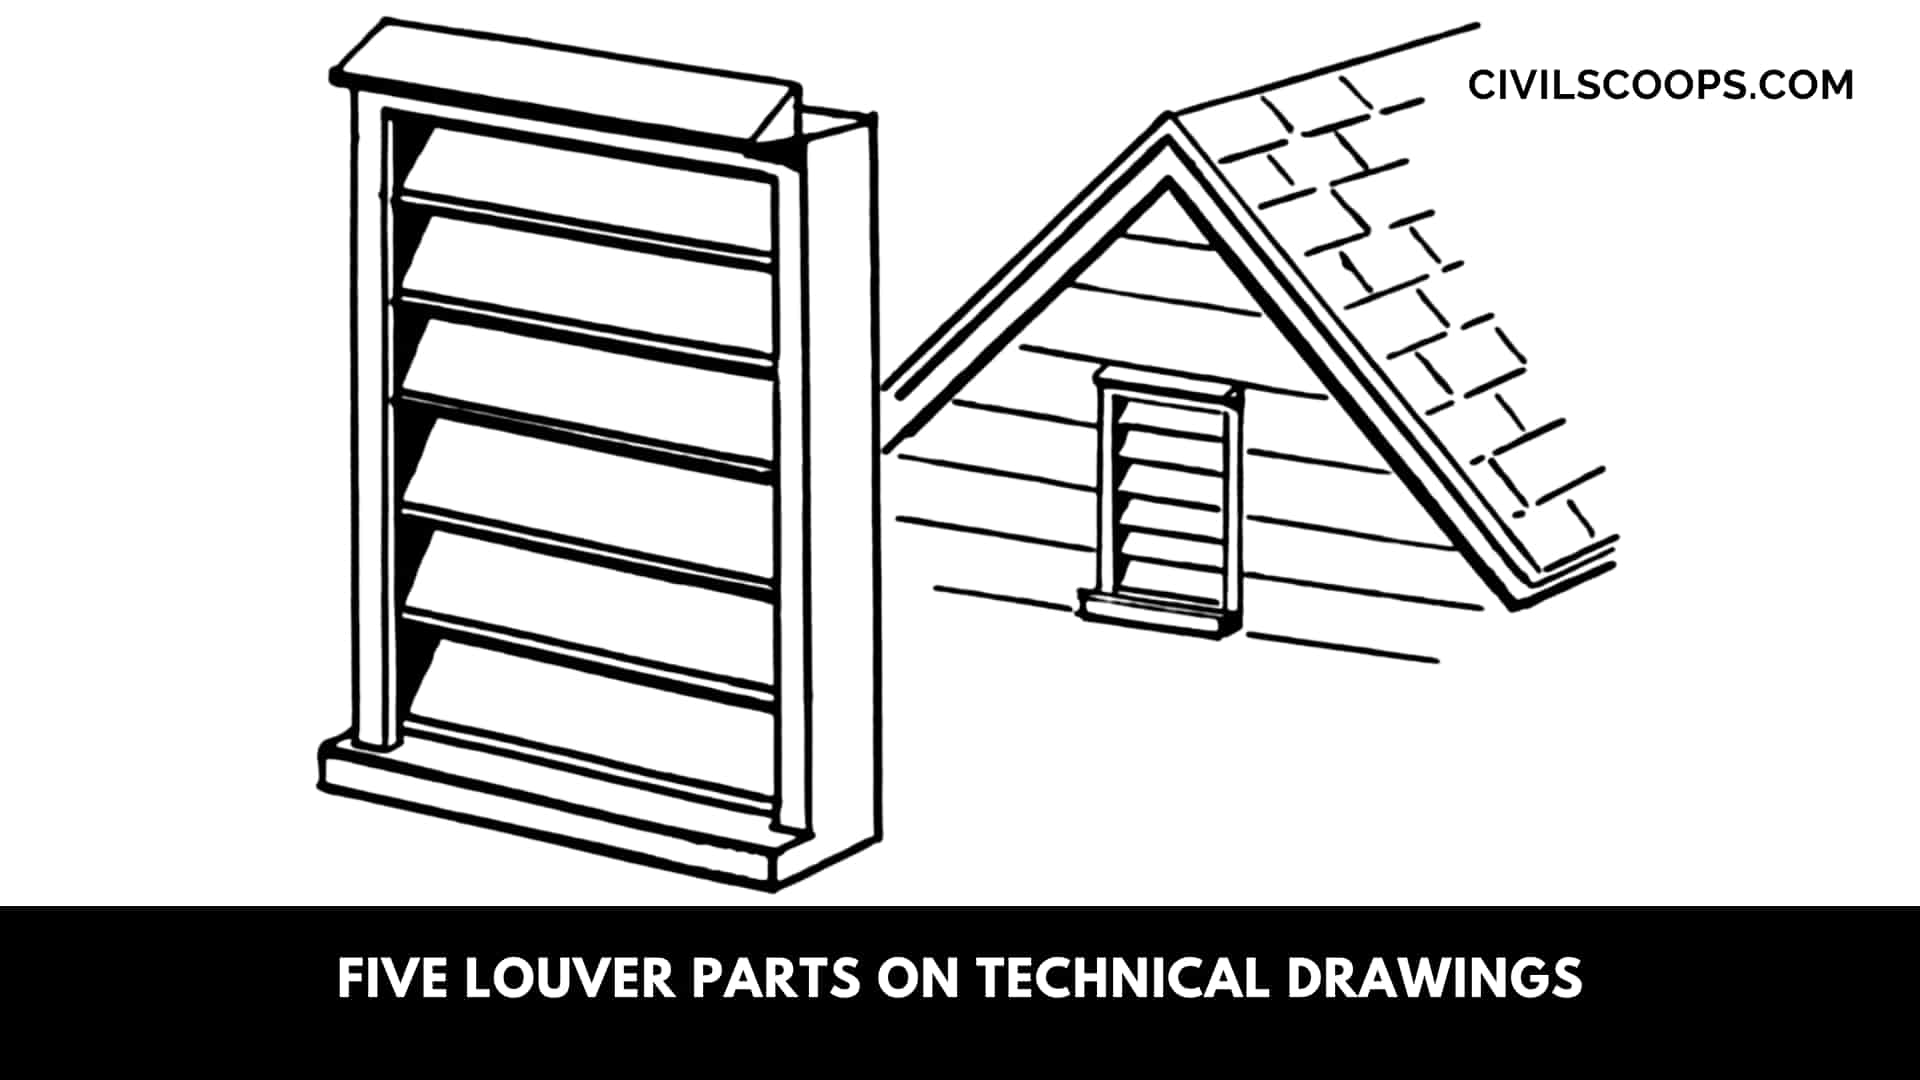 Five Louver Parts on Technical Drawings